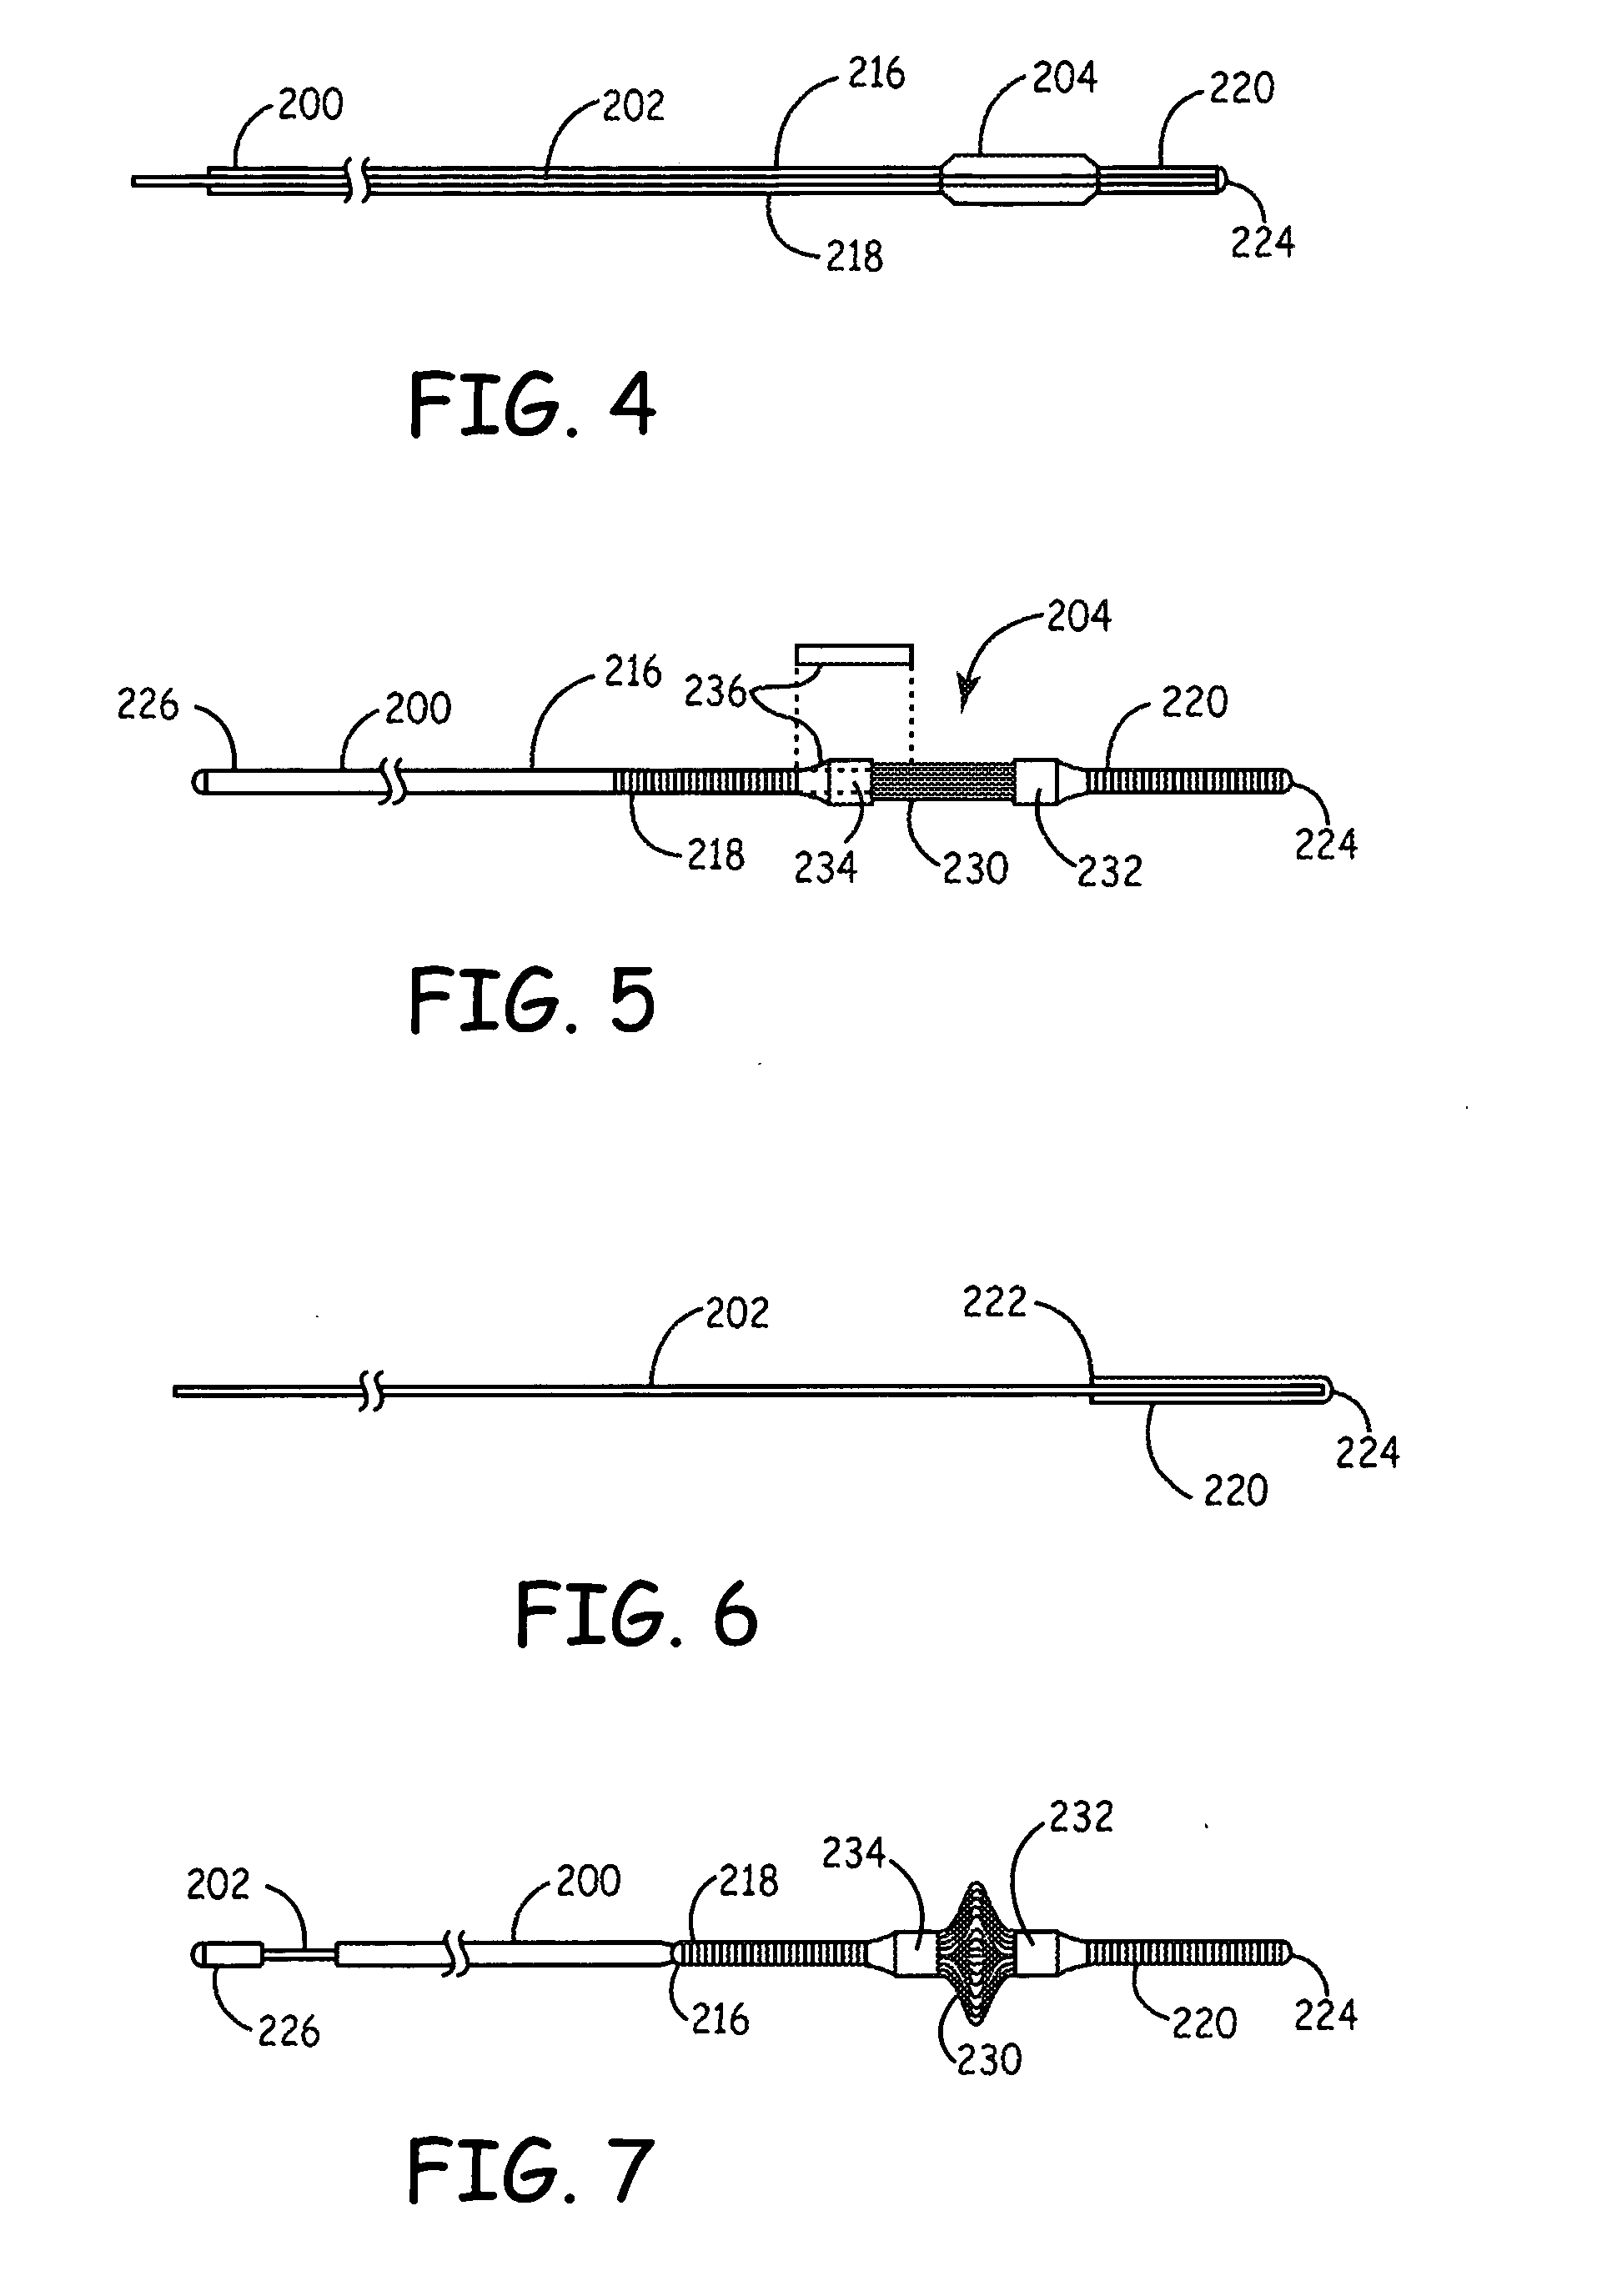 Embolectomy procedures with a device comprising a polymer and devices with polymer matrices and supports